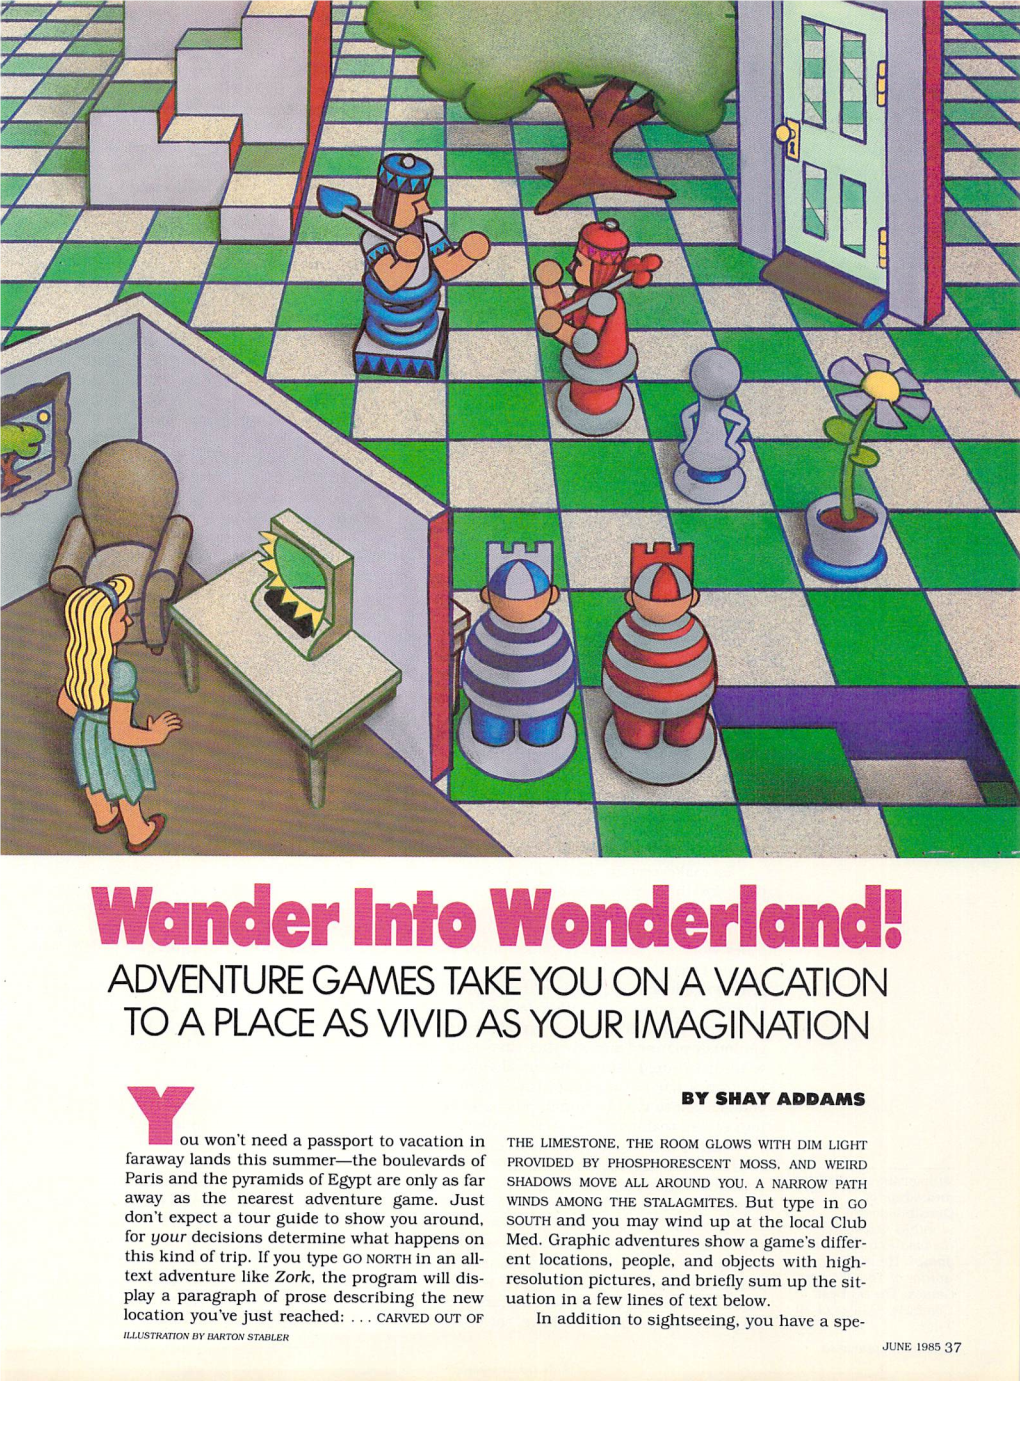 Wander Into Wonderland! ADVENTURE GAMES TAKE YOU on a VACATION to a PLACE AS VIVID AS YOUR IMAGINATION